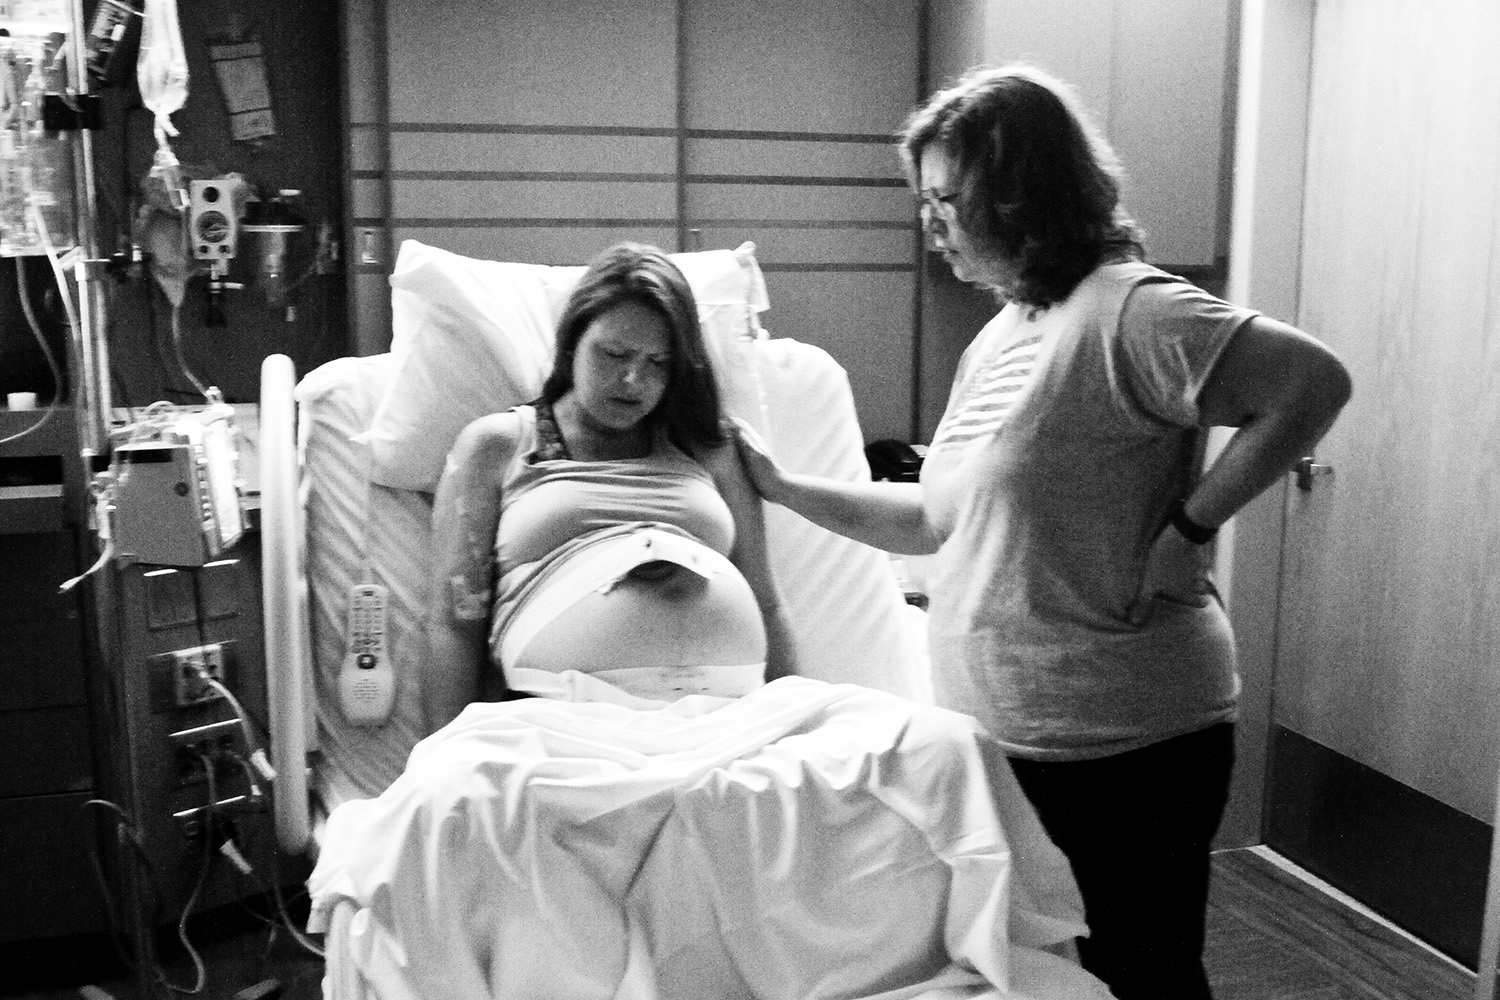 Woman in Labor with a Birth Doula by her sid